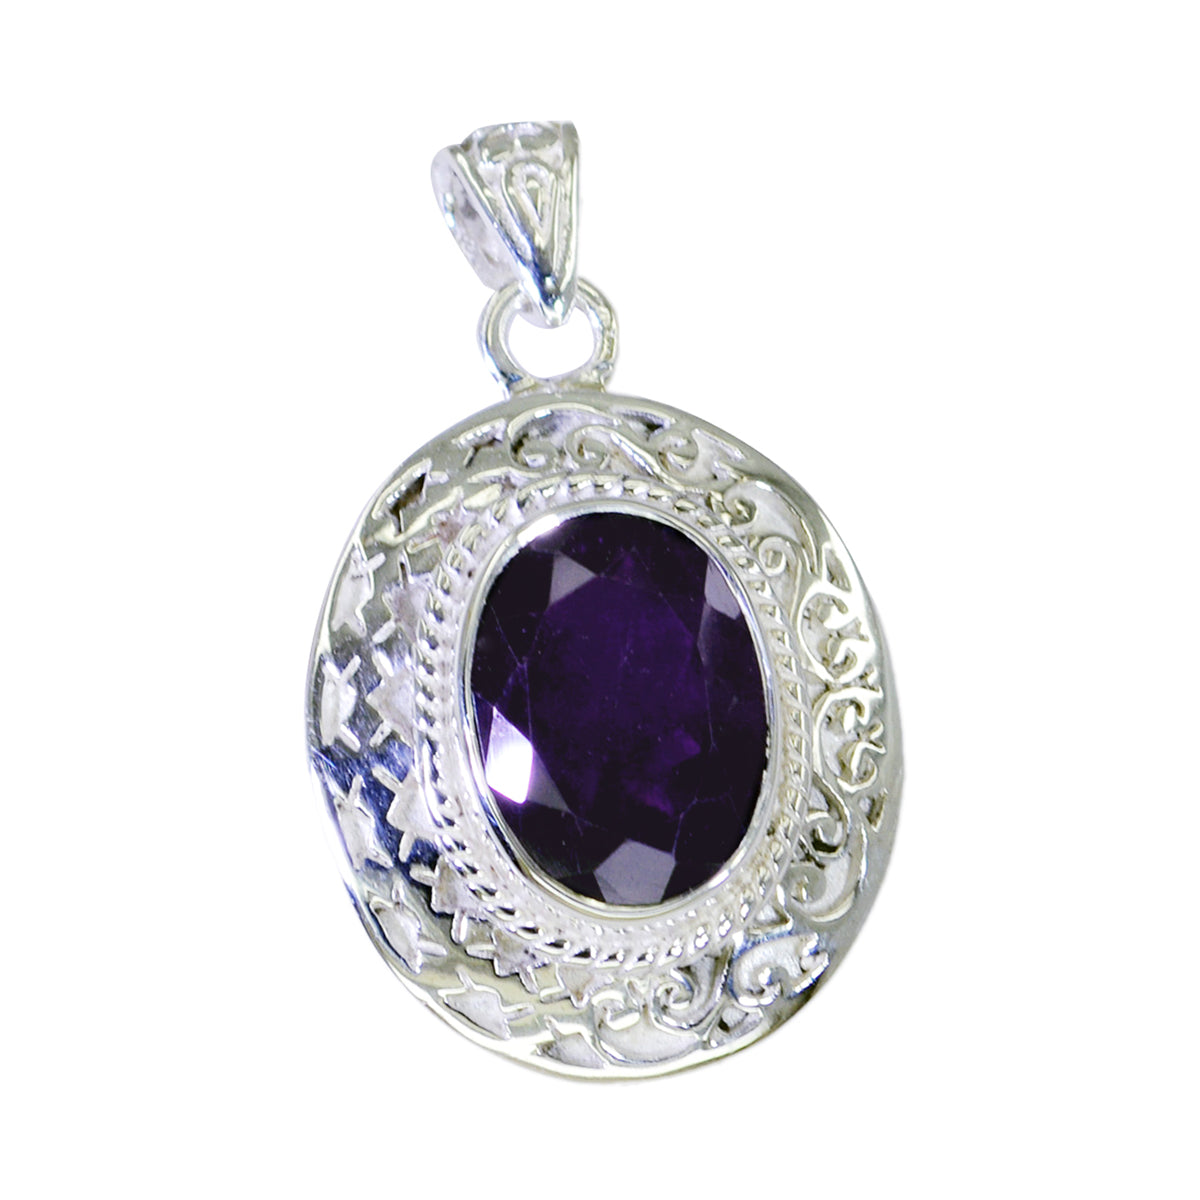 Riyo Fit Gemstone Oval Faceted Purple Amethyst 993 Sterling Silver Pendant Gift For Birthday